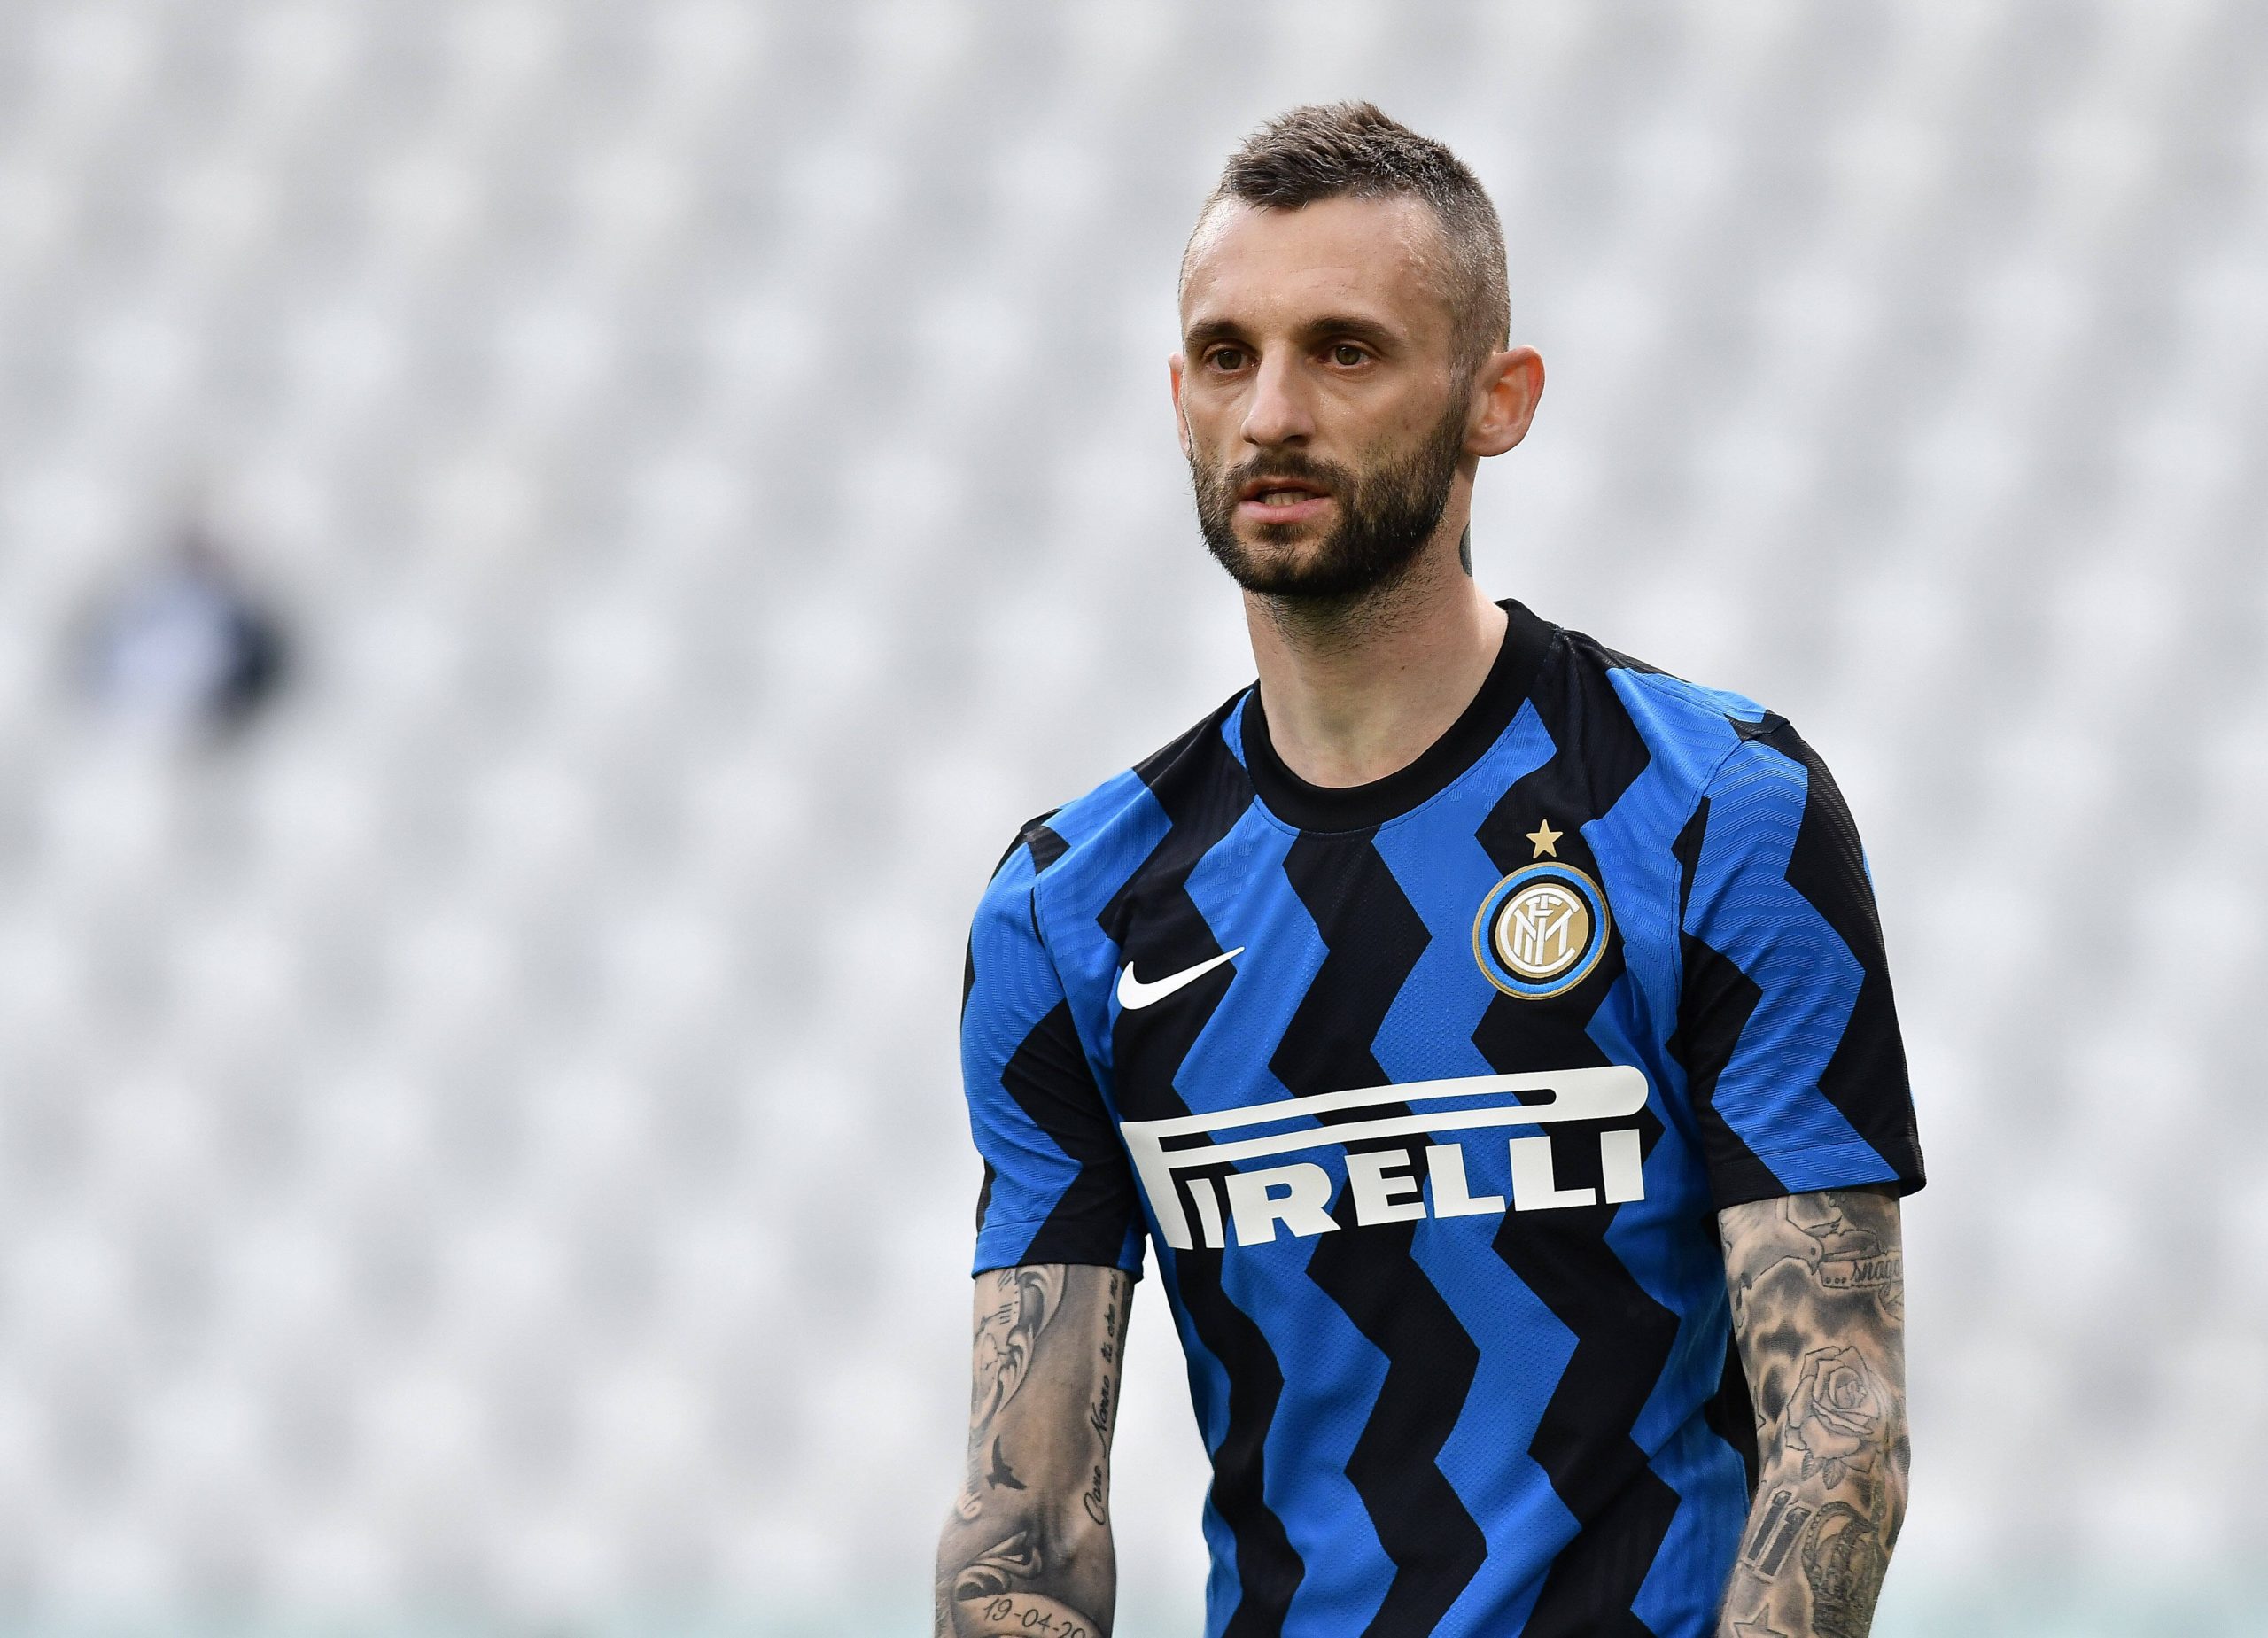 Manchester United suffer transfer blow as Marcelo Brozovic snubs interest to sign new Inter Milan contract.